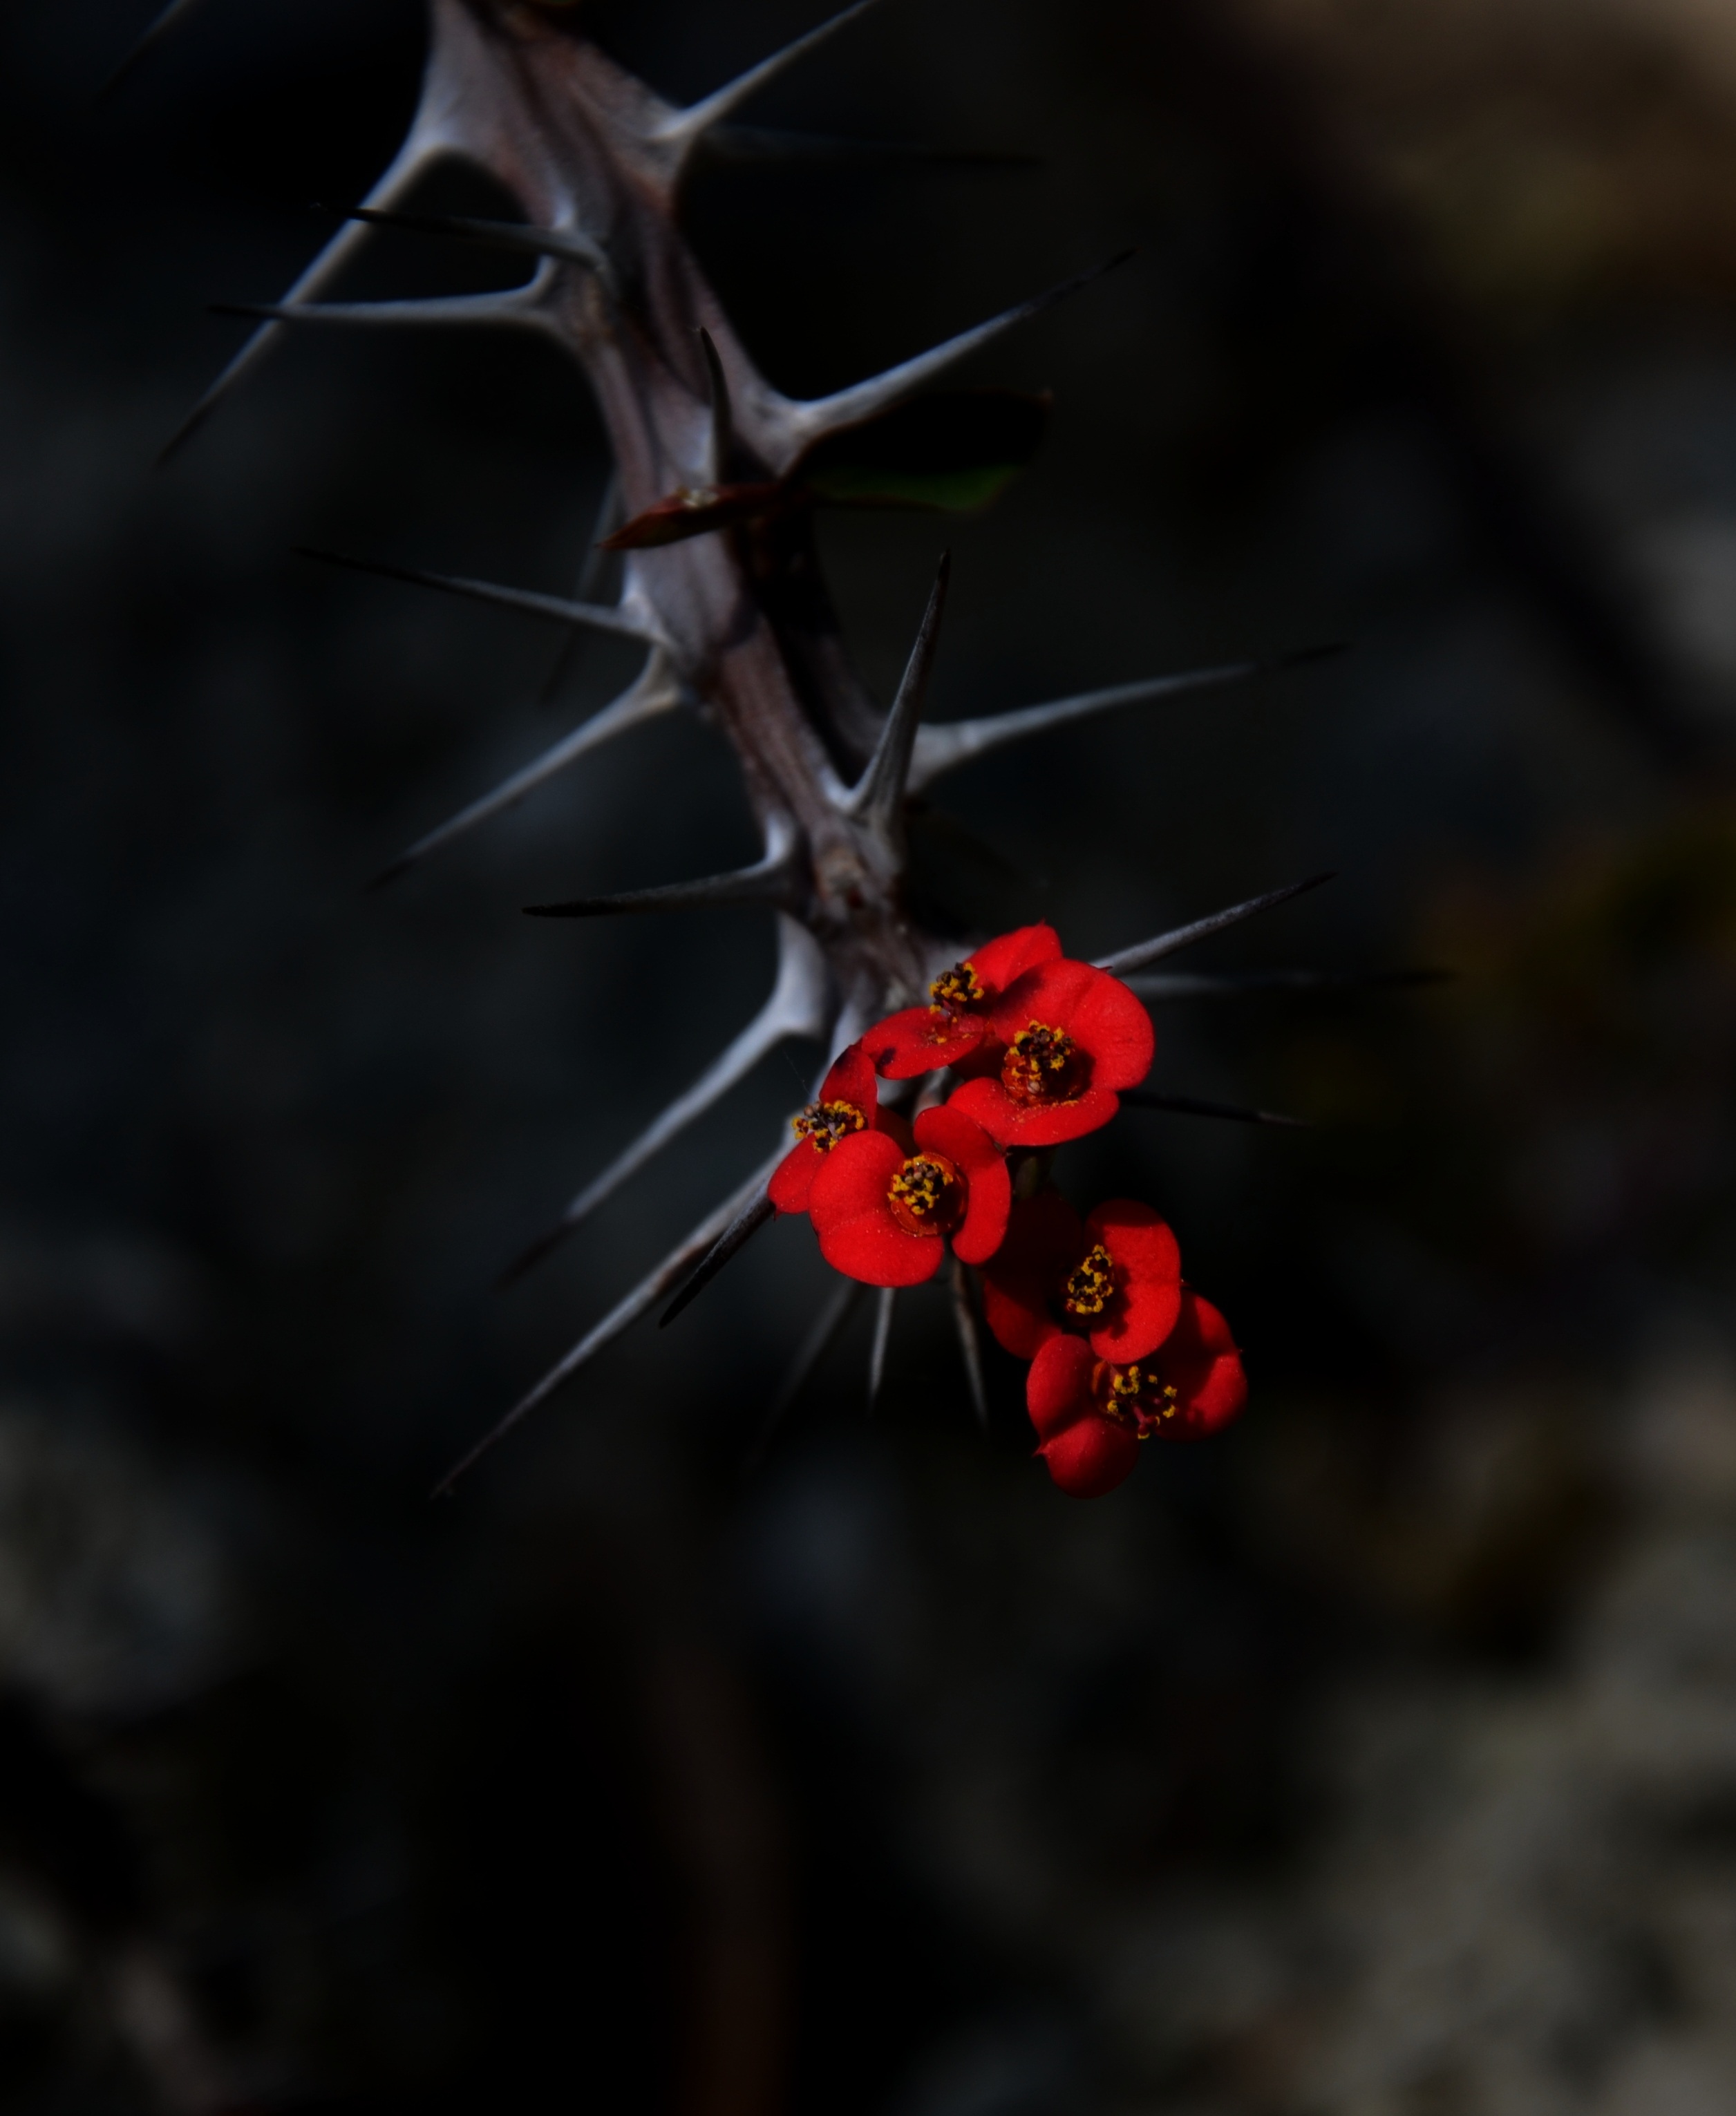 flowers, needle, red, macro, blur, smooth, thorns, prickles, spikes 1080p